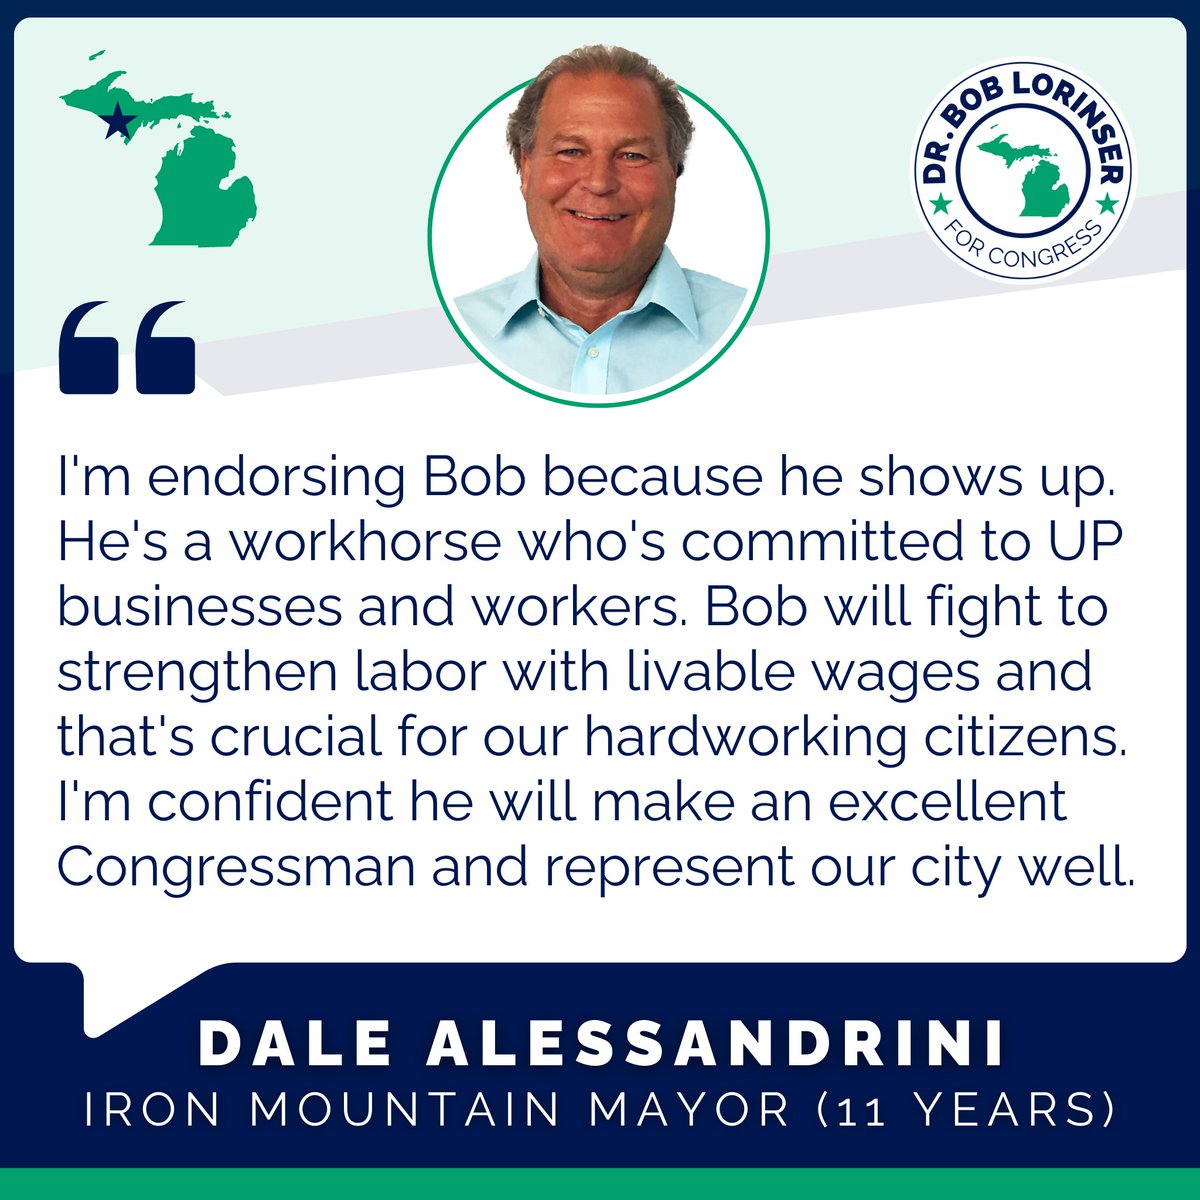 The endorsement of Mayor Dale Alessandrini means a lot. He's been elected and re-elected by Iron Mountain residents for 11 years for a reason — he, too, is a fighter for hardworking families. I'm grateful he’s on board. #MI01